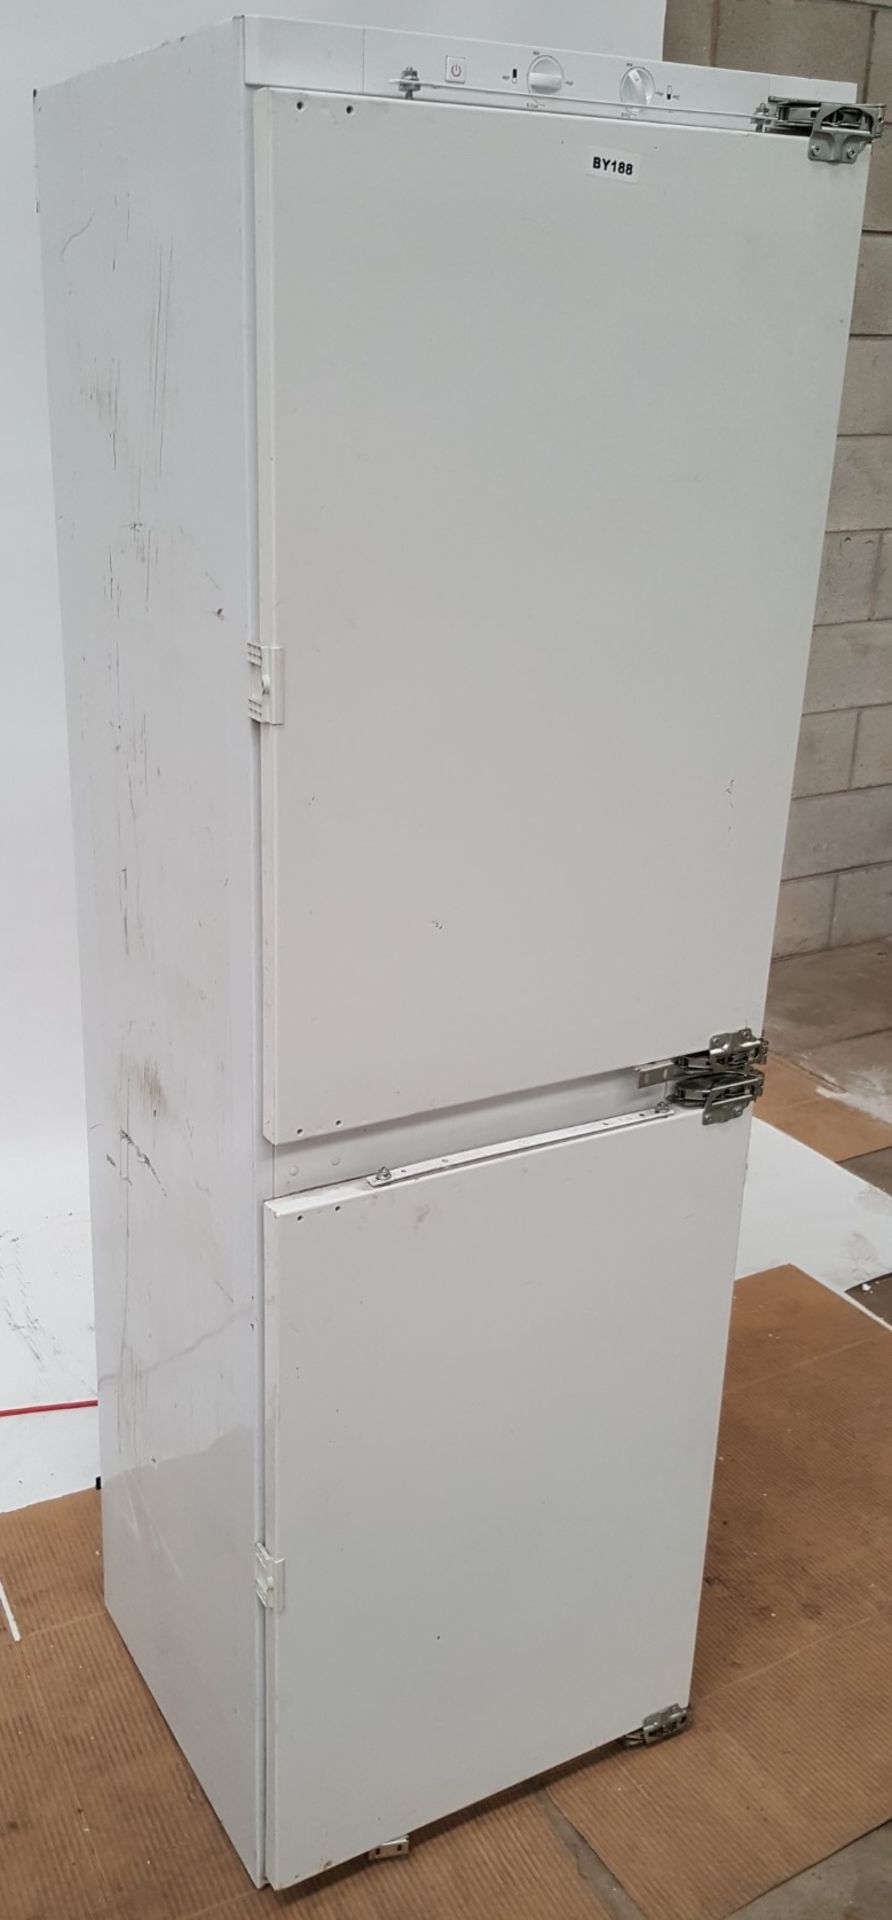 1 x Prima Integrated 50/50 Frost Free Fridge Freezer LPR475A1 - Ref BY188 - Image 2 of 8